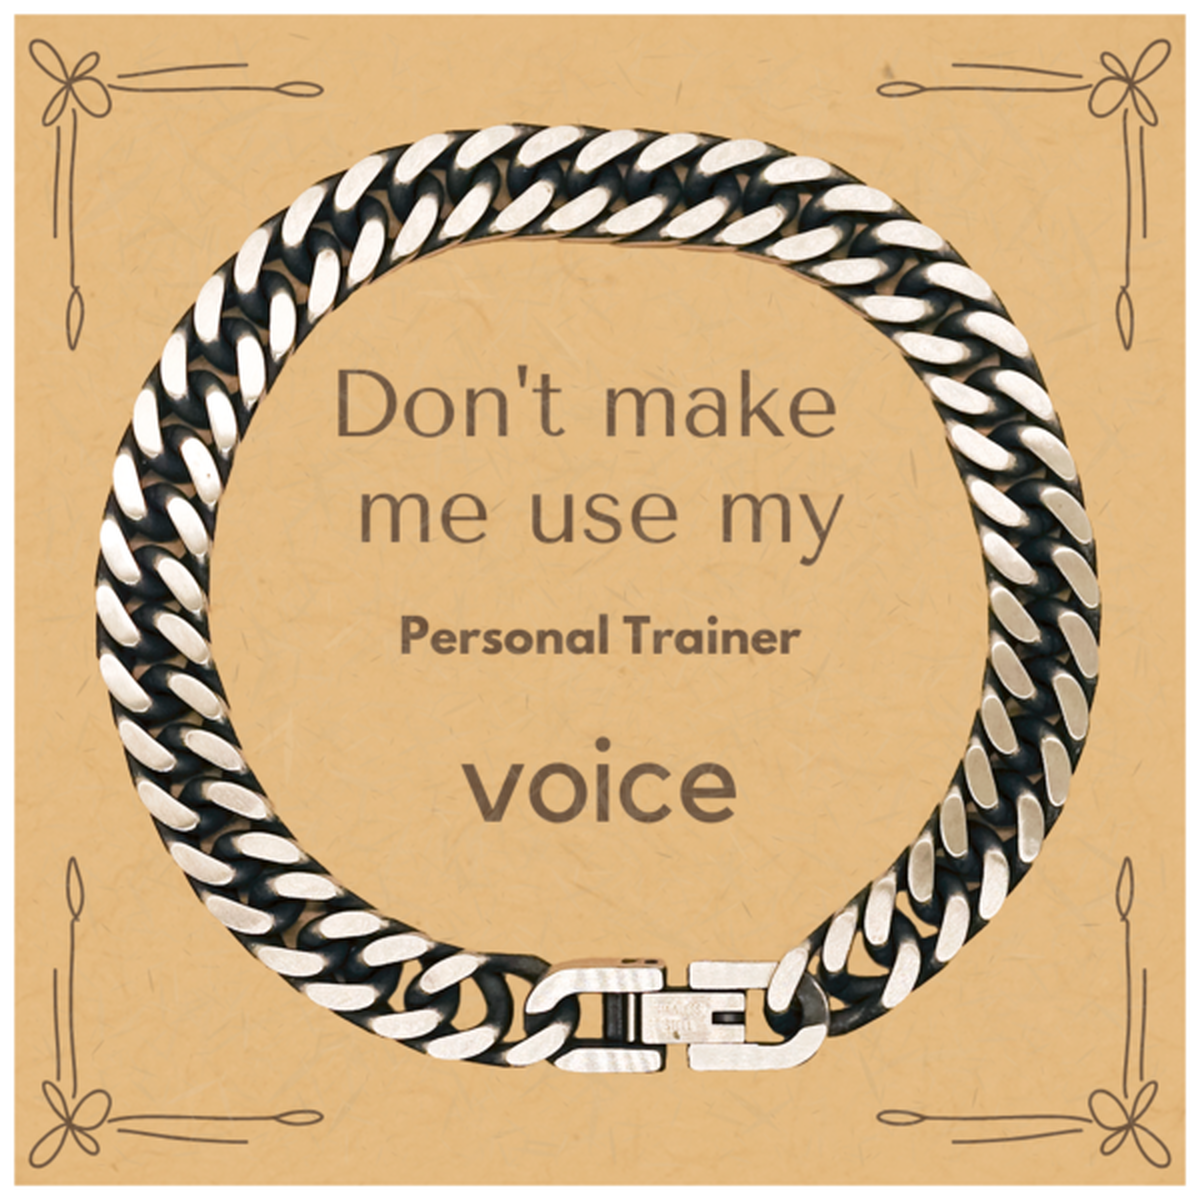 Don't make me use my Personal Trainer voice, Sarcasm Personal Trainer Card Gifts, Christmas Personal Trainer Cuban Link Chain Bracelet Birthday Unique Gifts For Personal Trainer Coworkers, Men, Women, Colleague, Friends